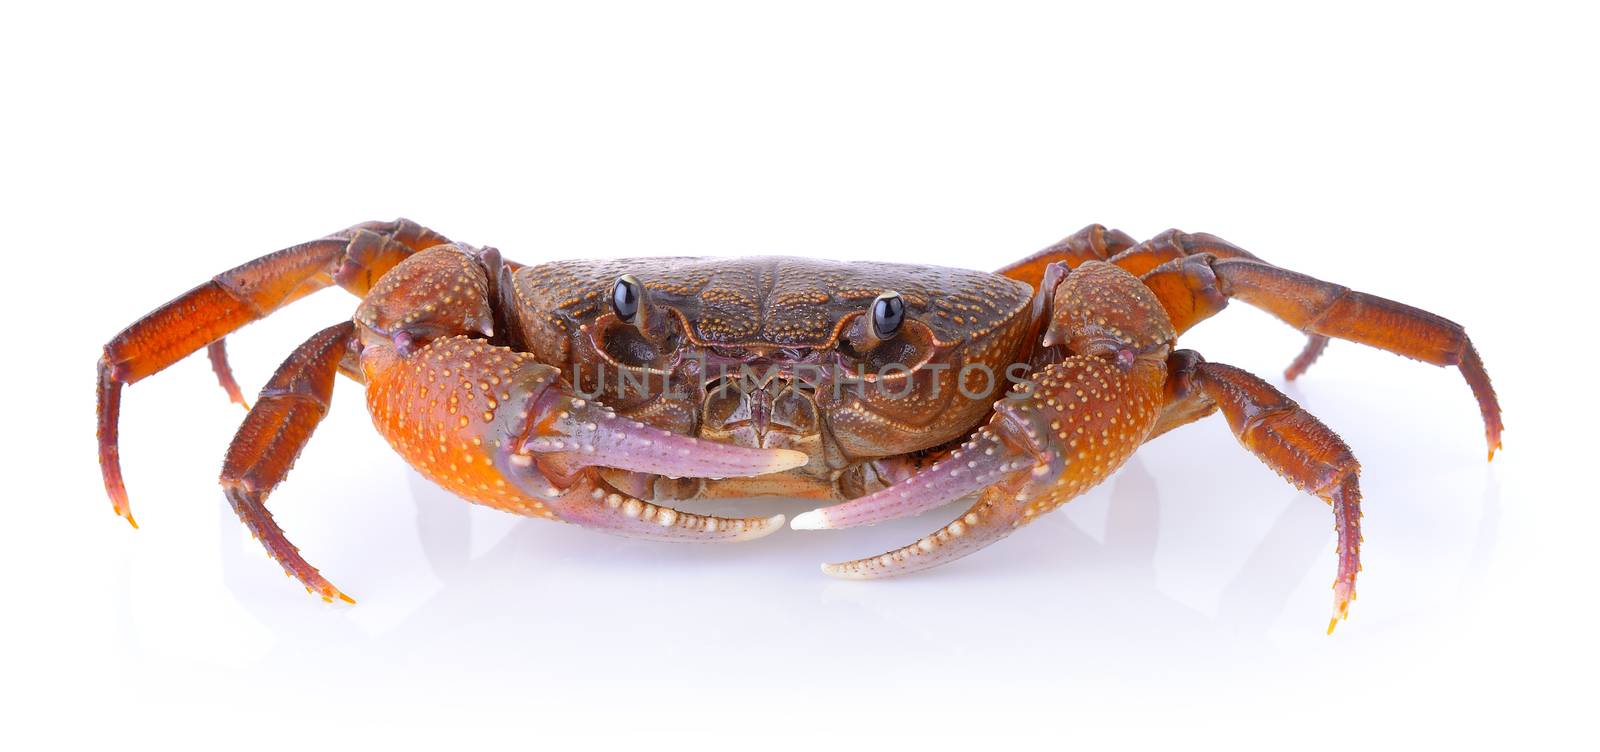 crab on white background by sommai